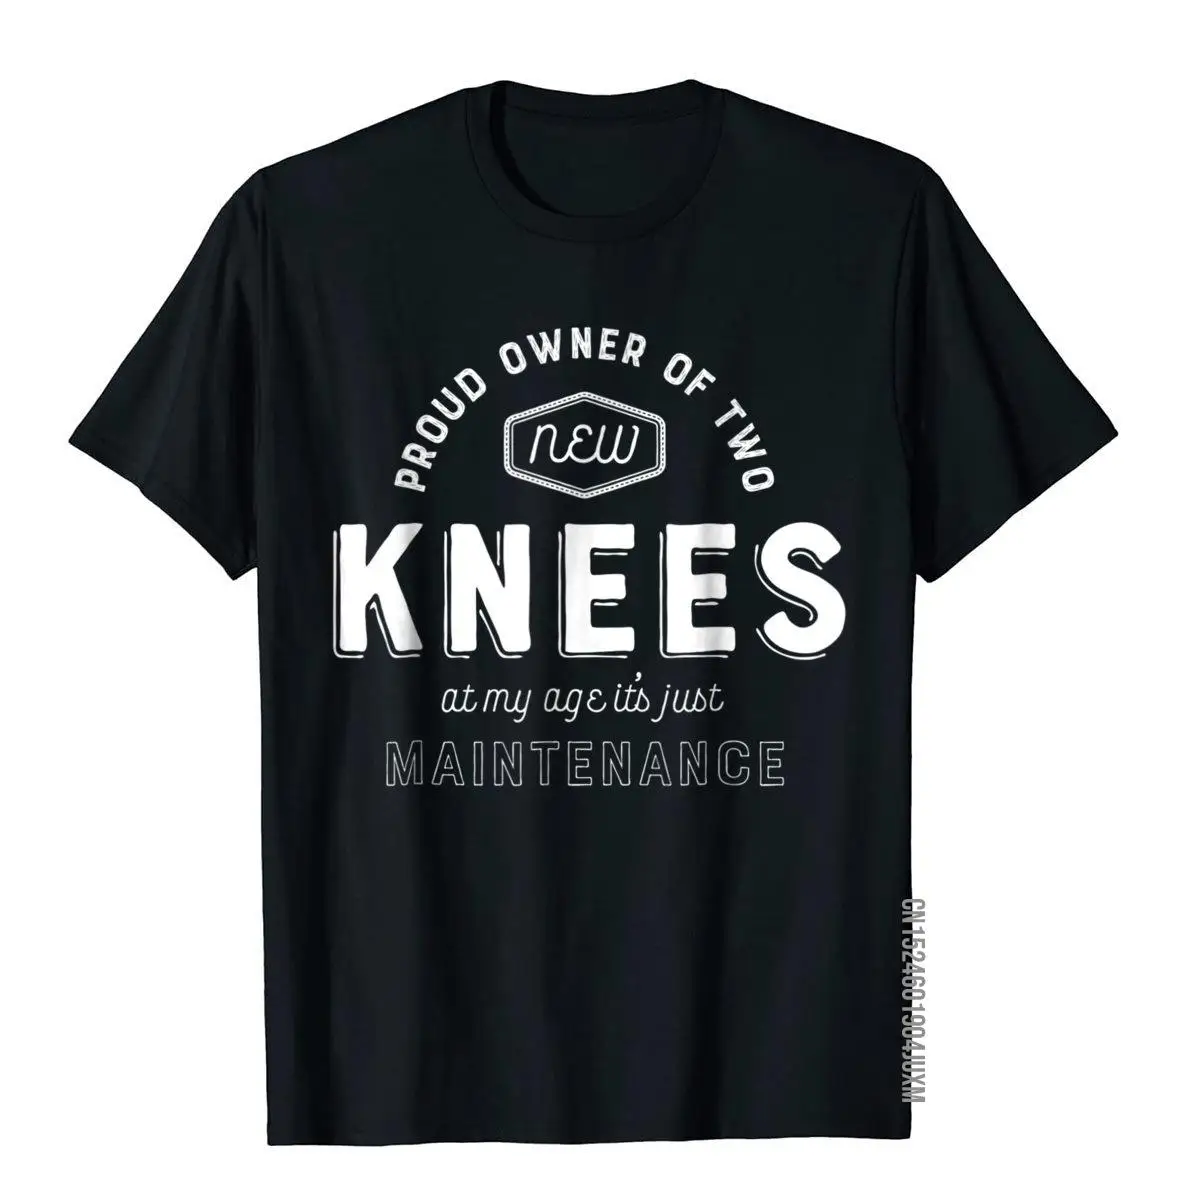 Knee Replacement Surgery Shirt Funny Get Well Gift Hospital__97A1451black